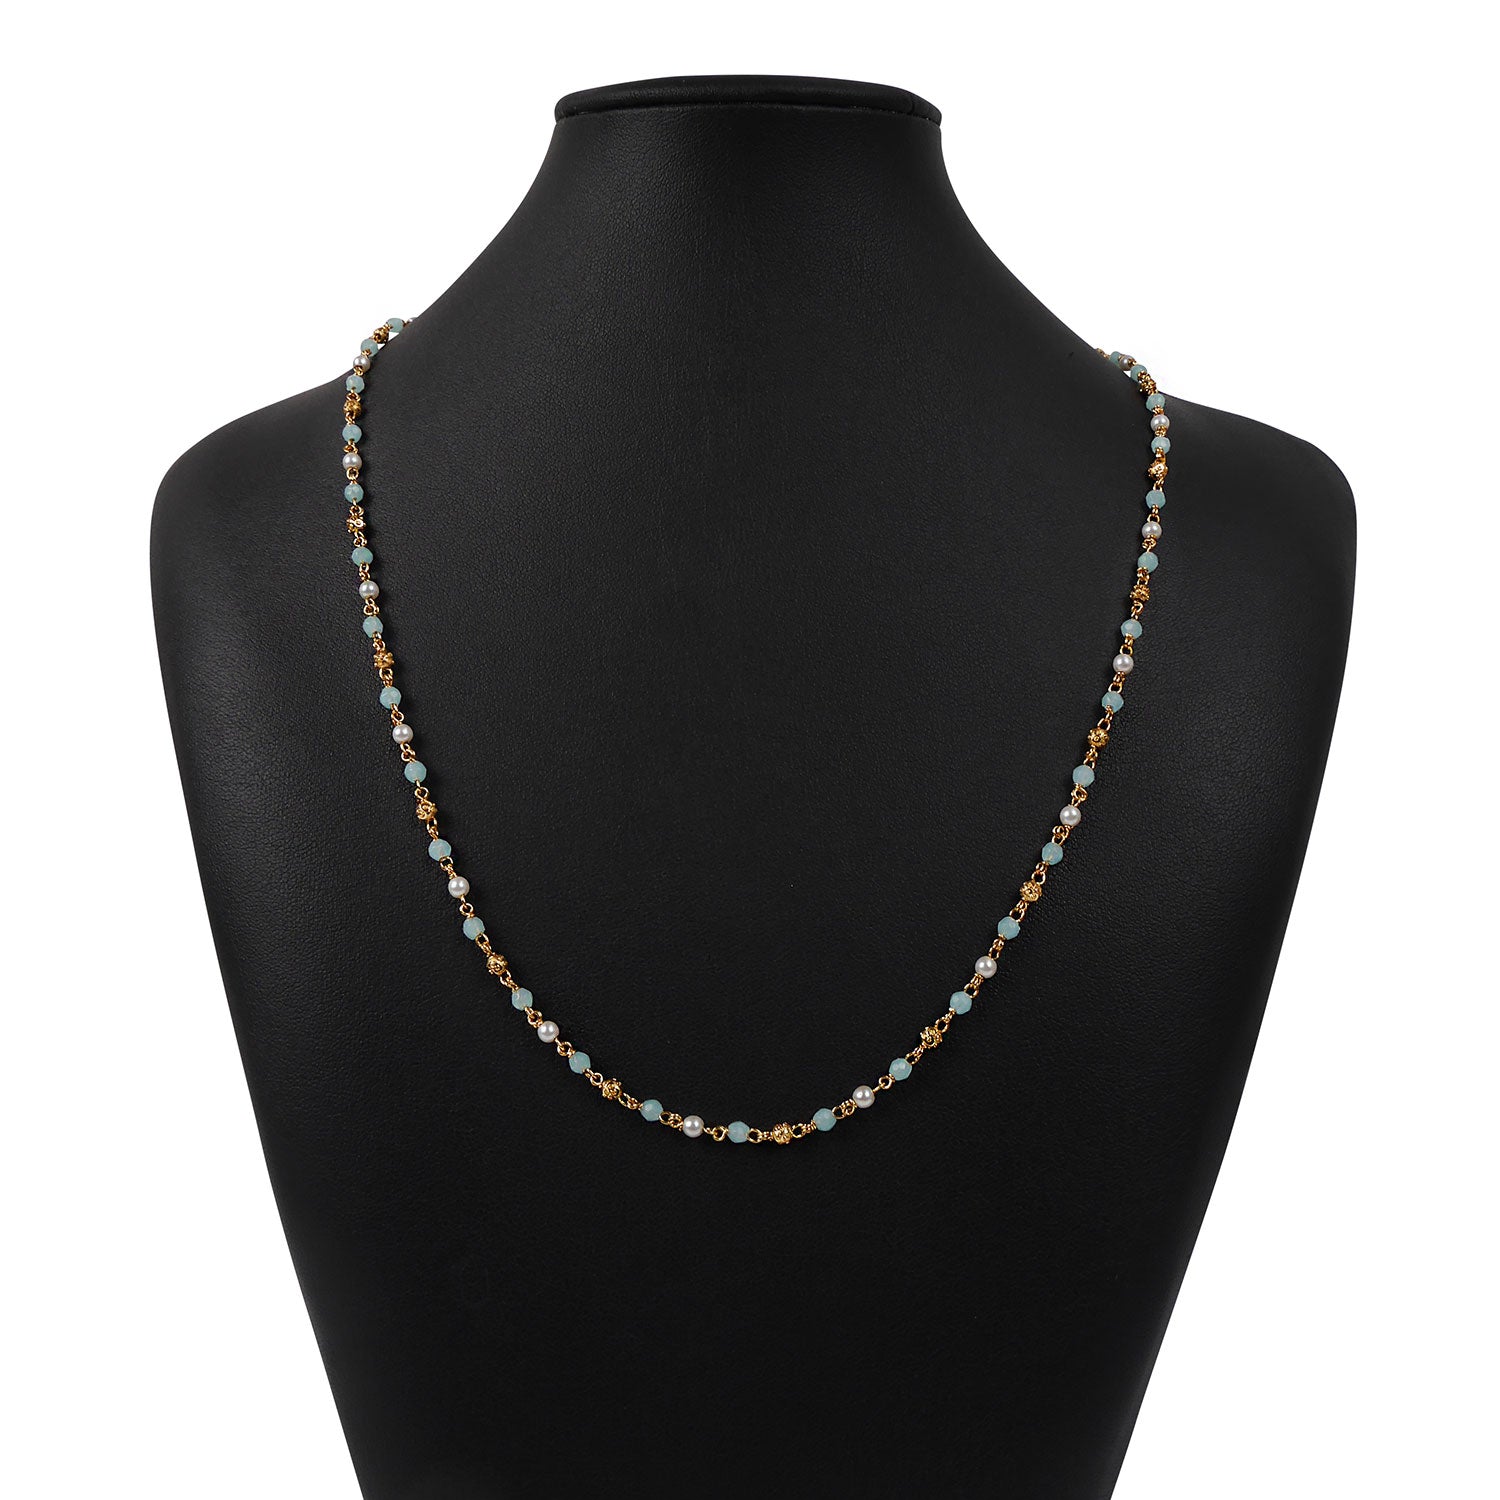 Cora Beaded Chain in Light Blue